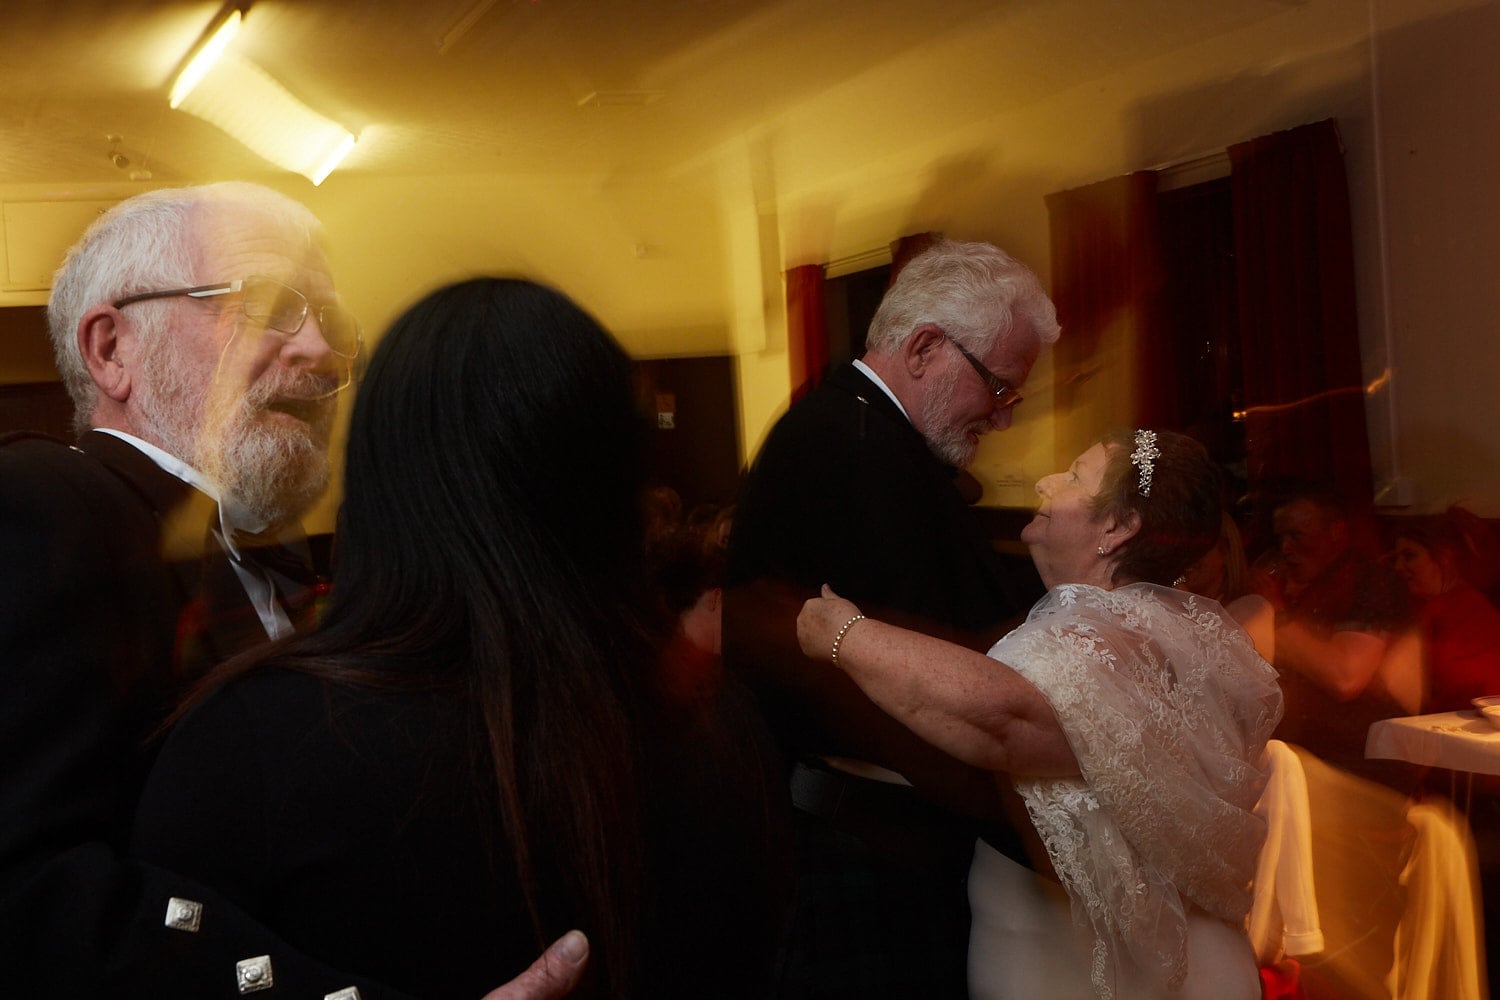 A bride & groom along with the best man and his granddaughter dance at a wedding reception